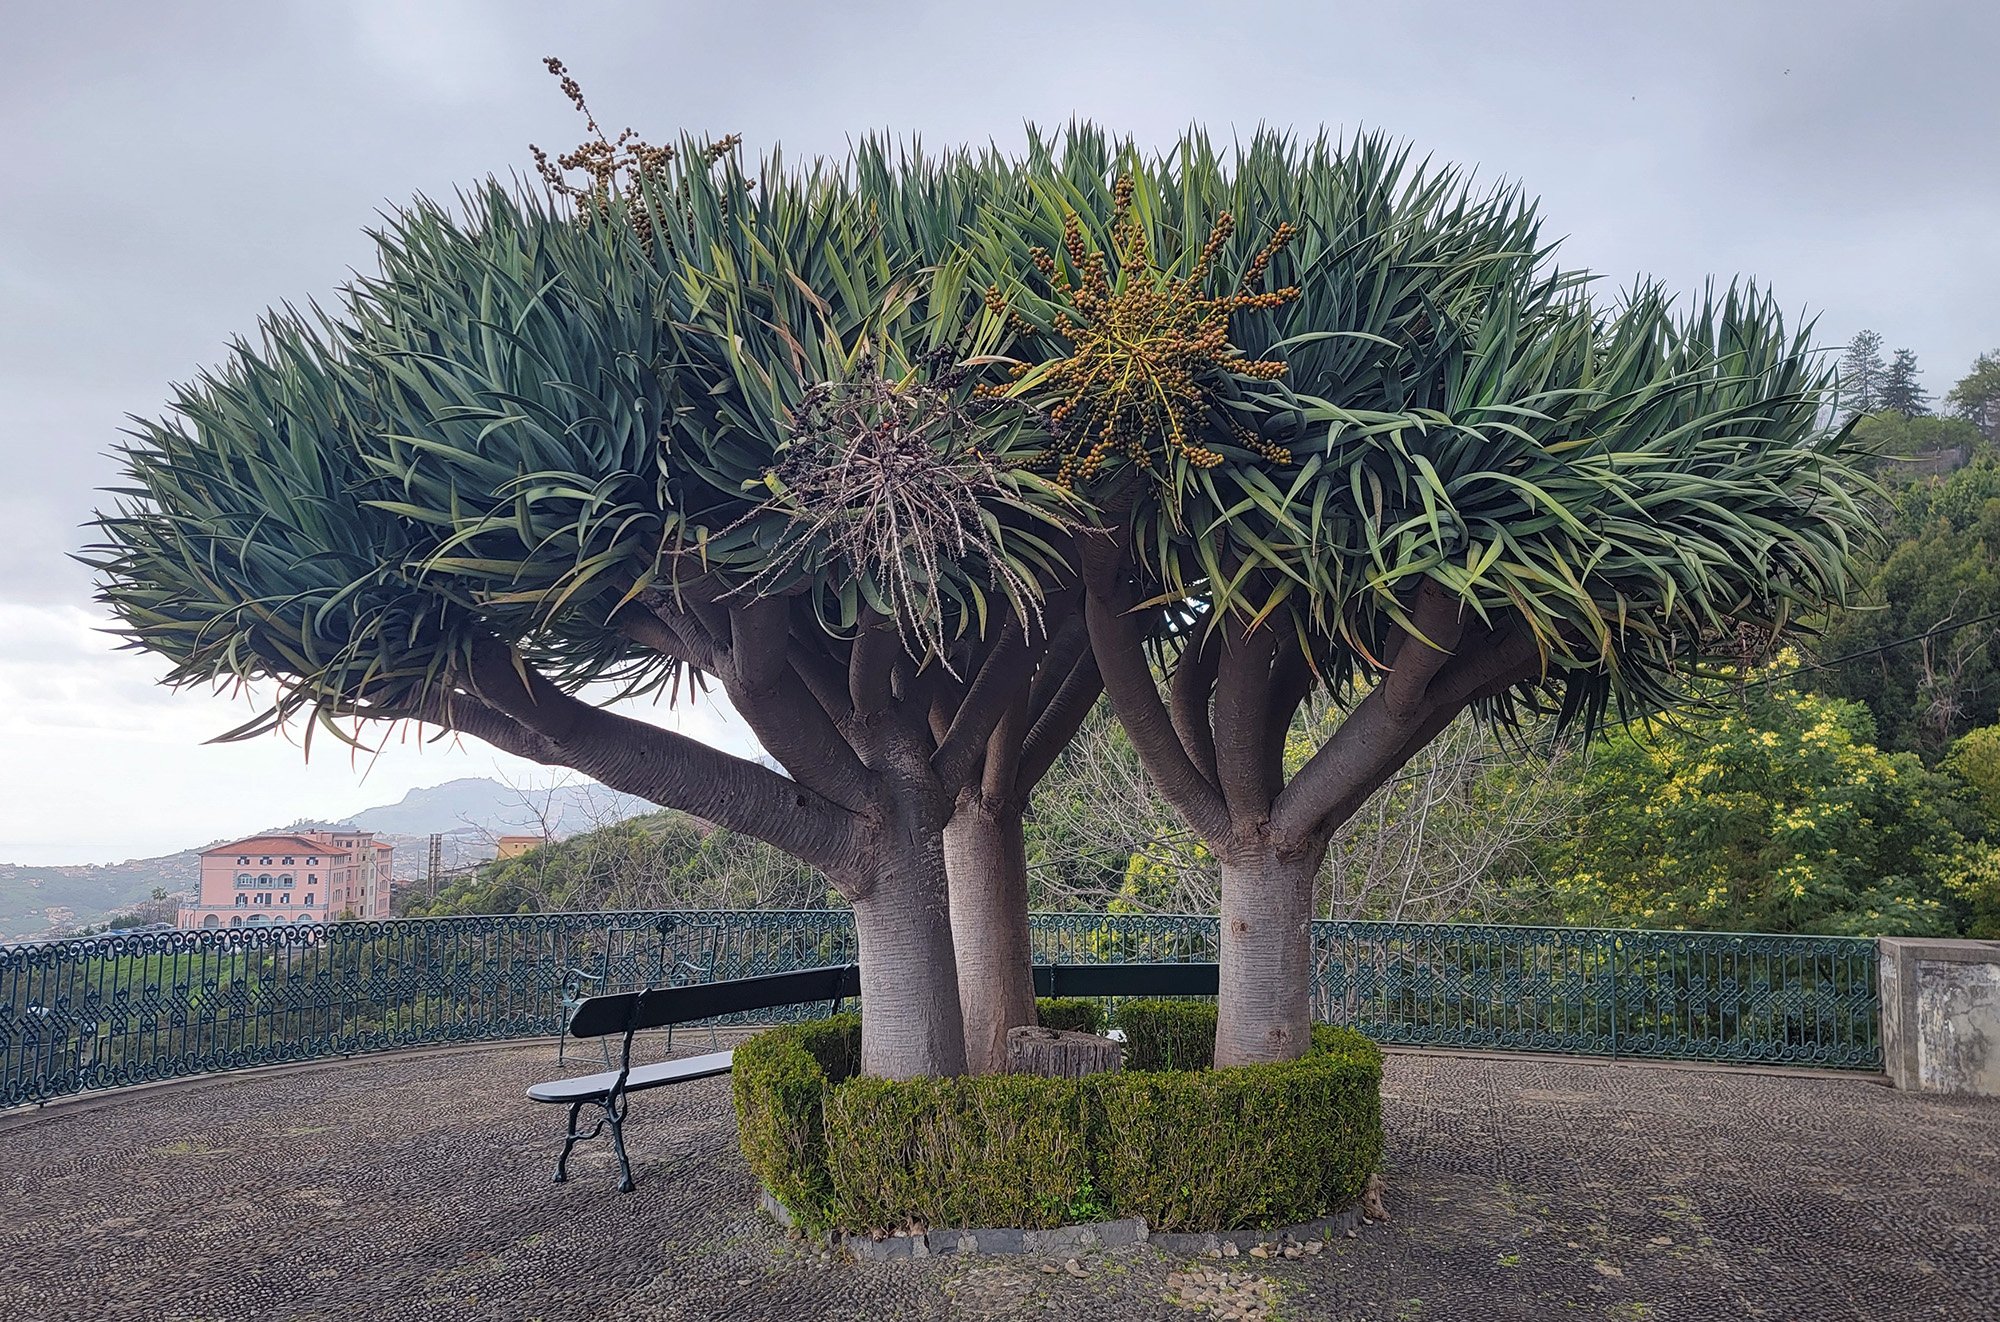 These things are called "Dragon Trees". 